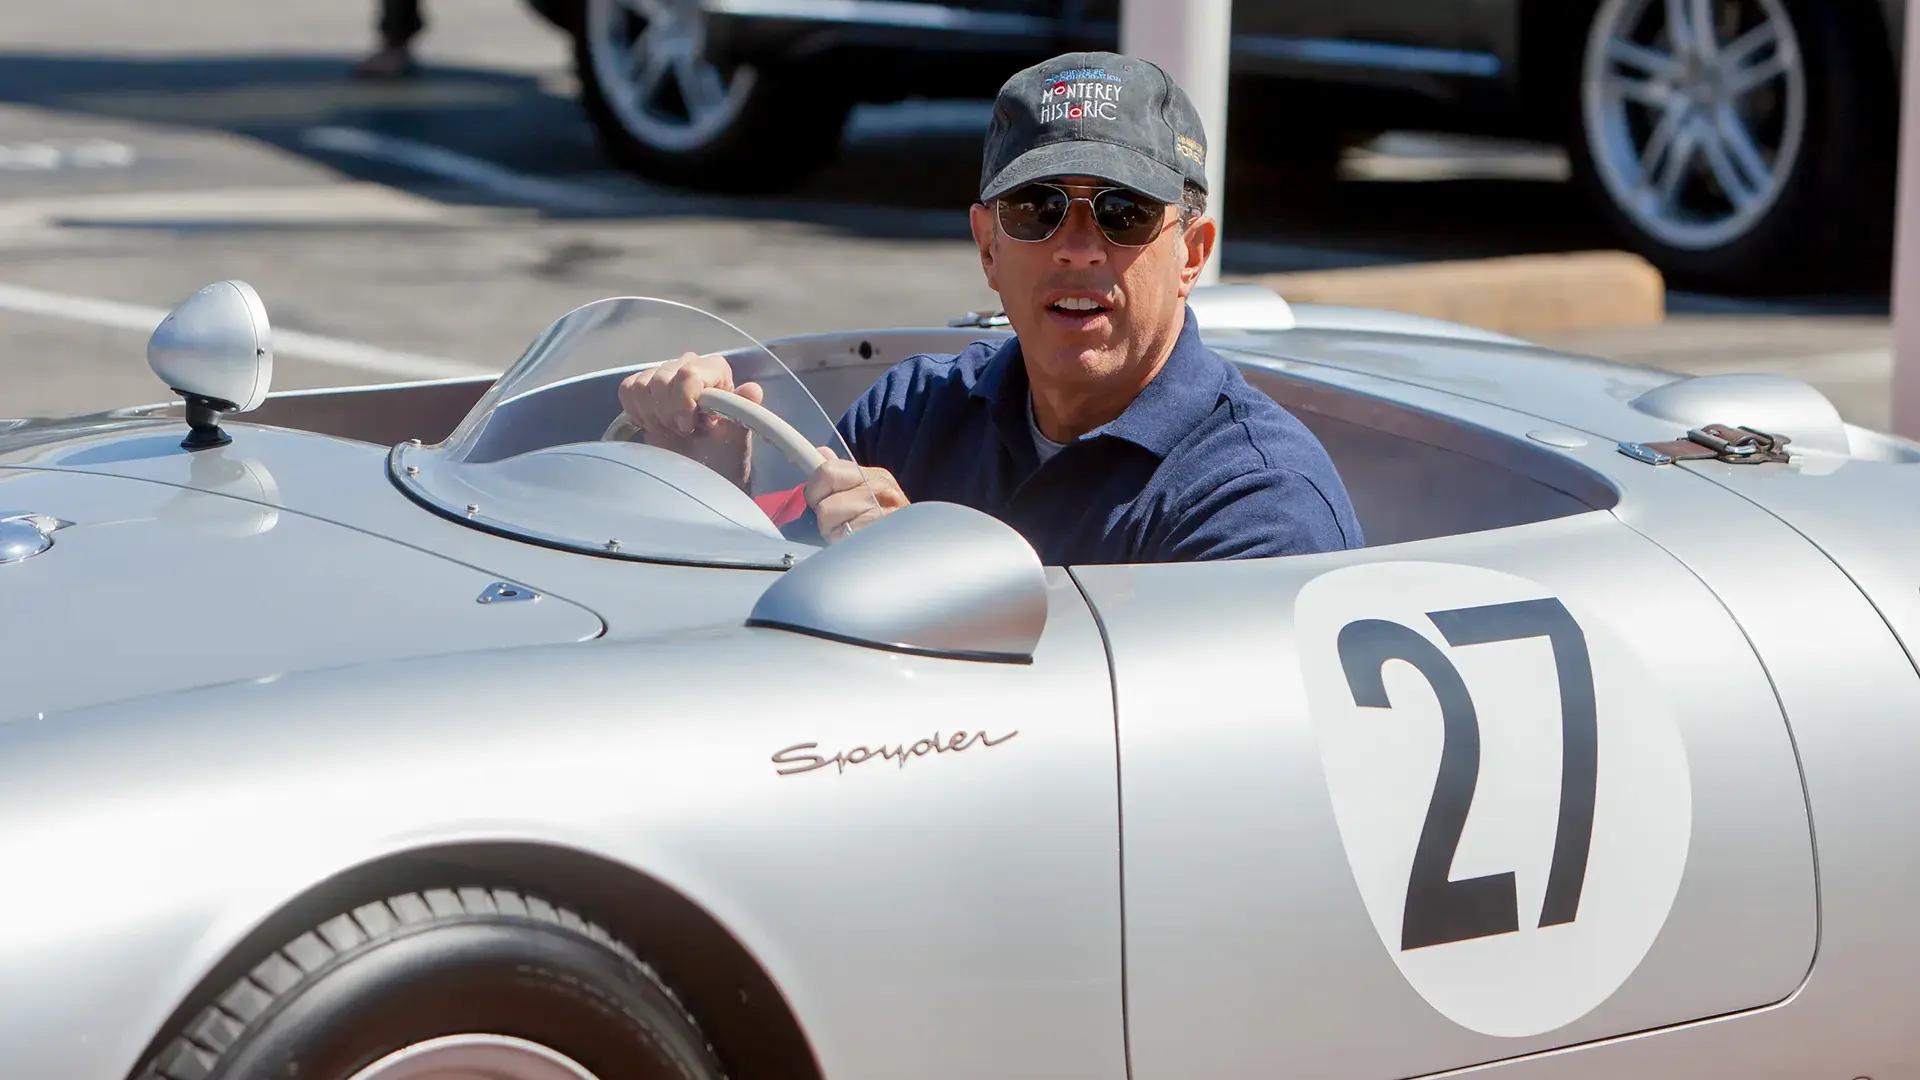 Business F1 Top 20 Petrolheads: Jerry Seinfeld, A Desire For Comedy And Cars